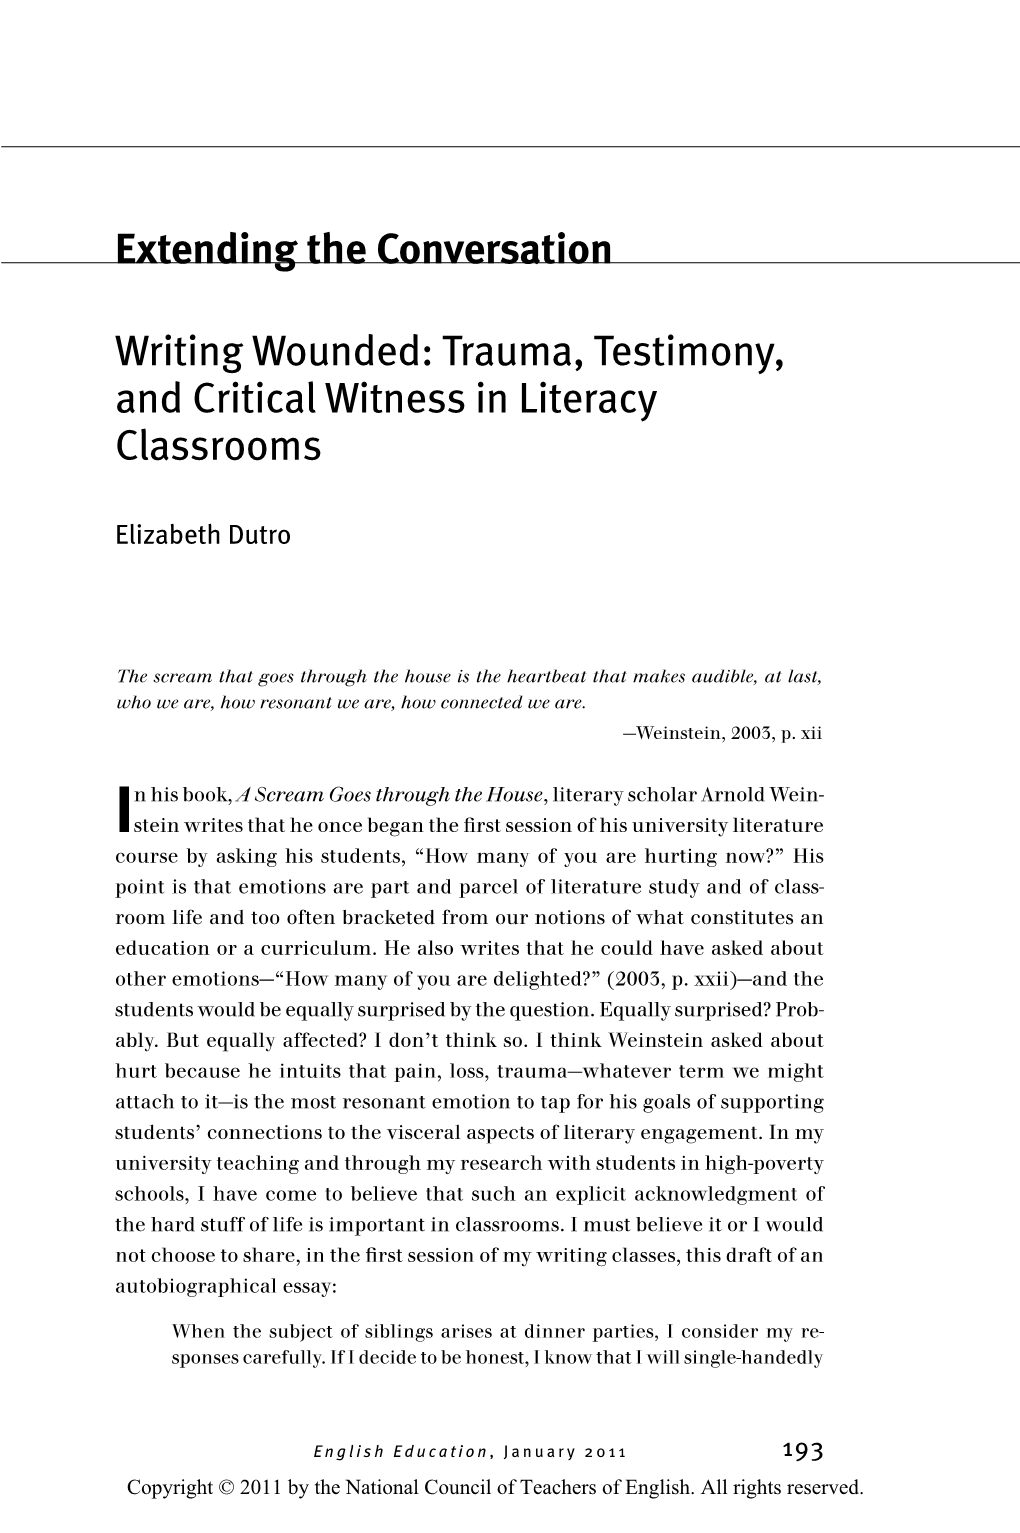 Writing Wounded: Trauma, Testimony, and Critical Witness in Literacy Classrooms Extending the Conversation